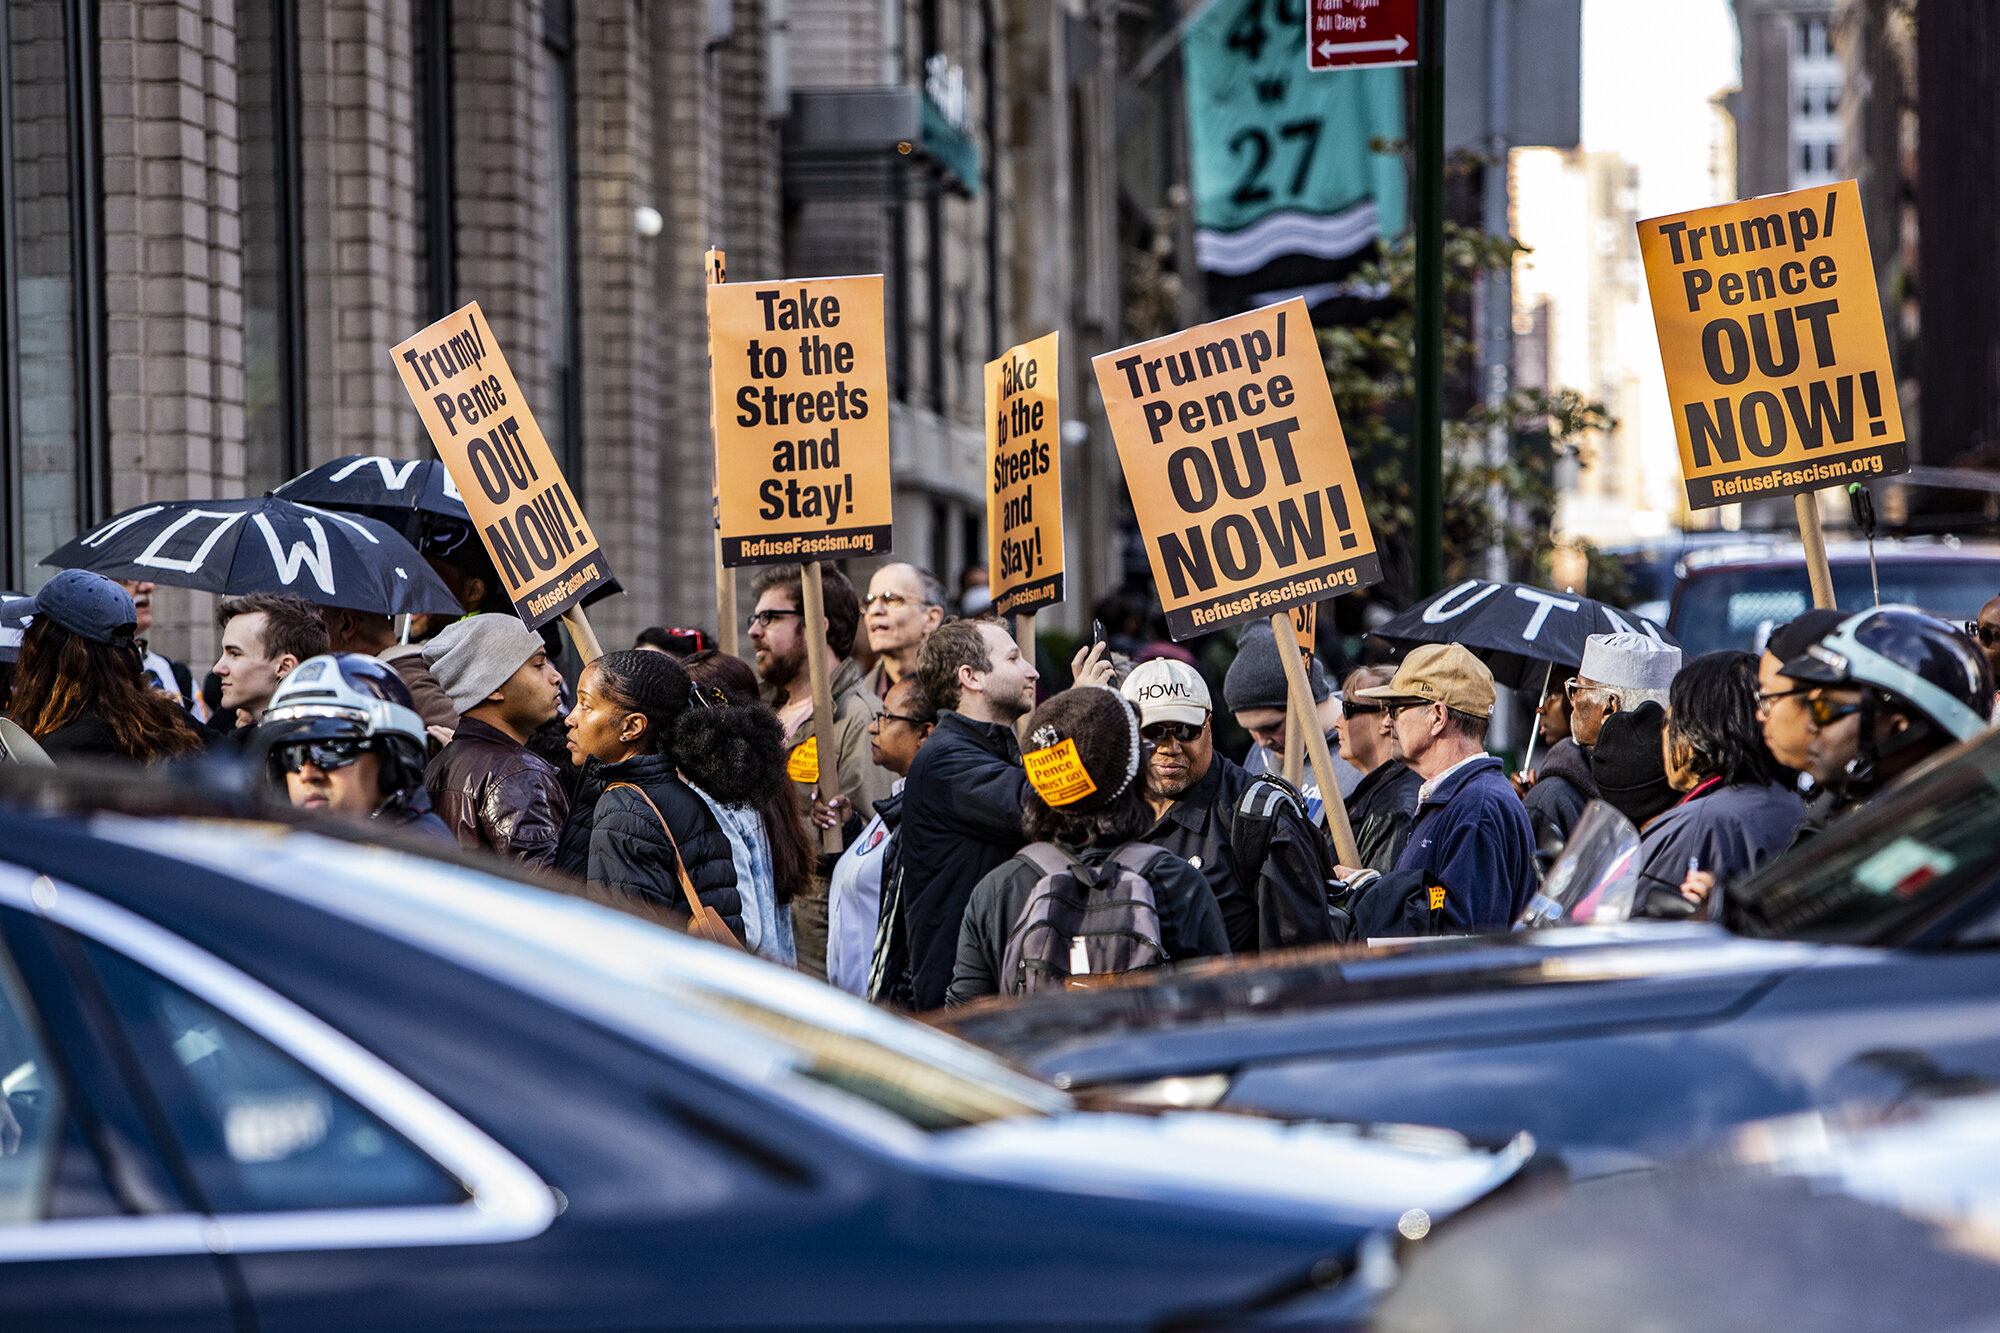 OUTNOW_Protest_2019_NYC-0978.jpg